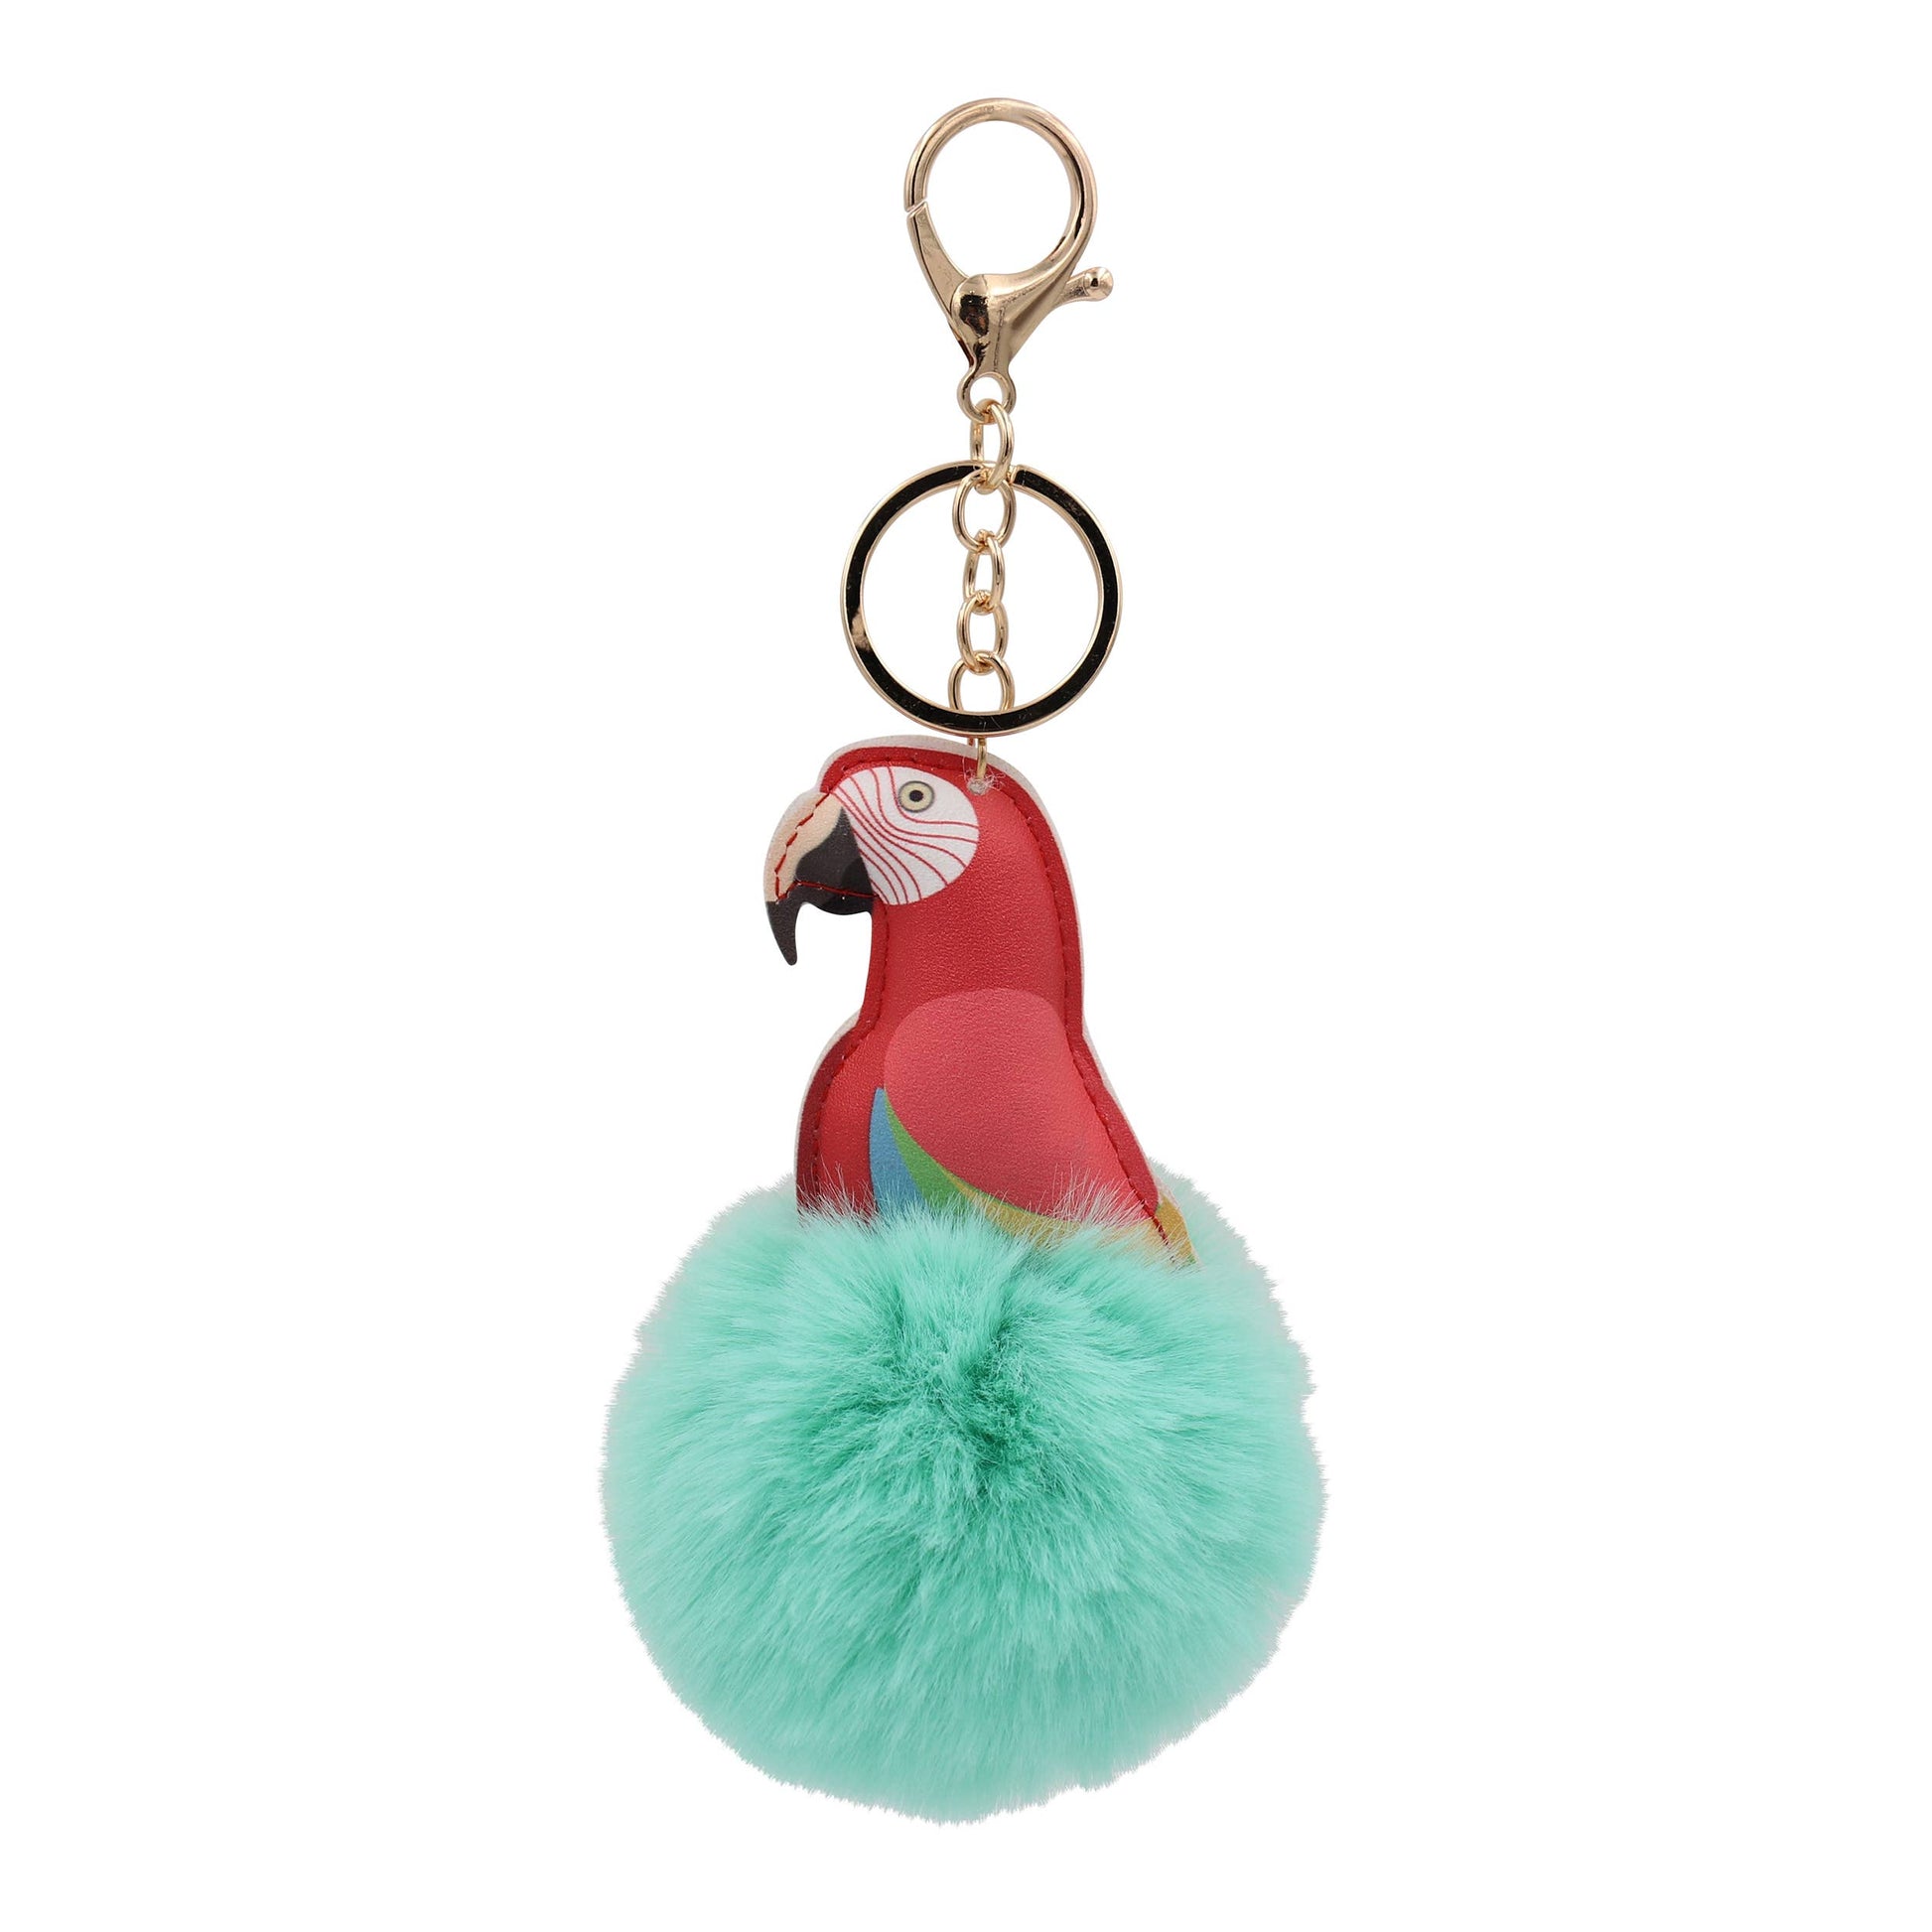 Image of Real Sic Mint Cute Colorful Parrots Pom Pom Key chain - Fuzzy Key chain